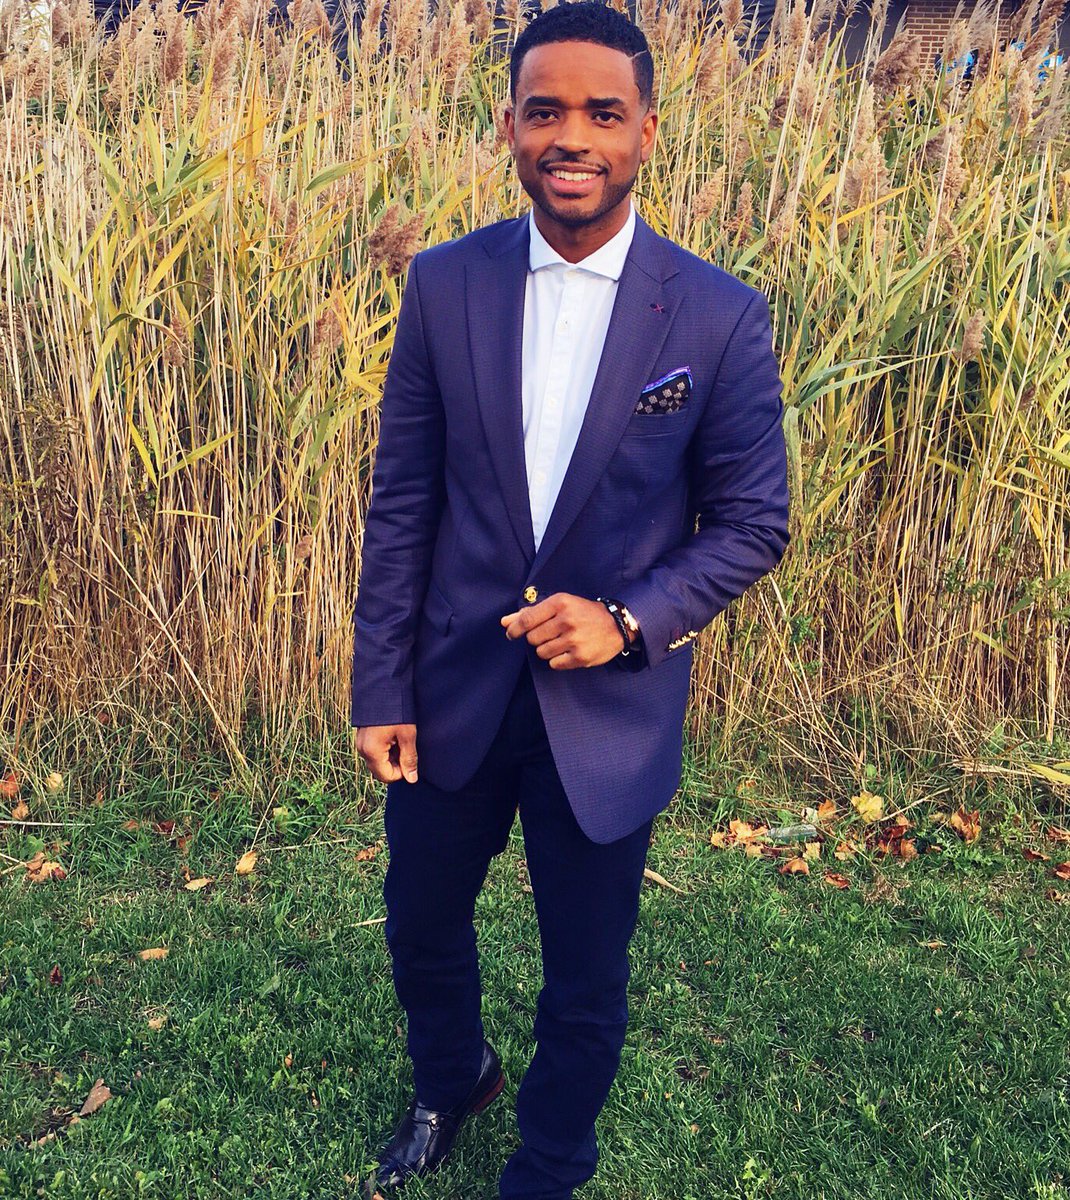 RT @LarenzTate: Sometimes the grass IS greener on the other side. 
#SteadyGrinding
#BusinessEthics ???? https://t.co/c1UYmwf6n9